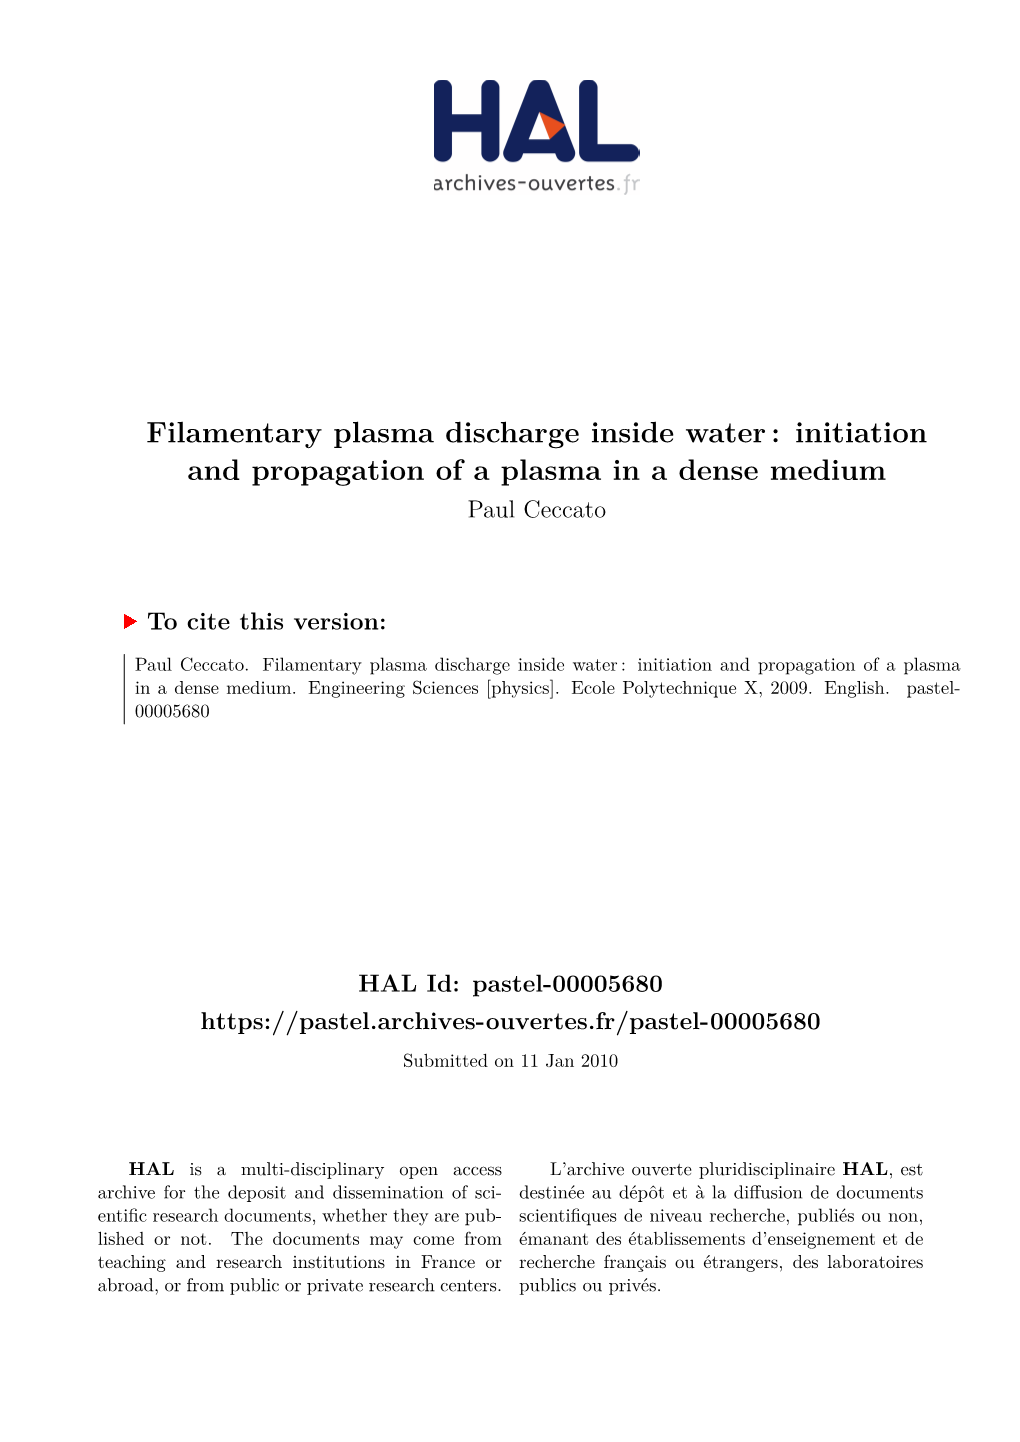 Filamentary Plasma Discharge Inside Water: Initiation and Propagation of a Plasma in a Dense Medium